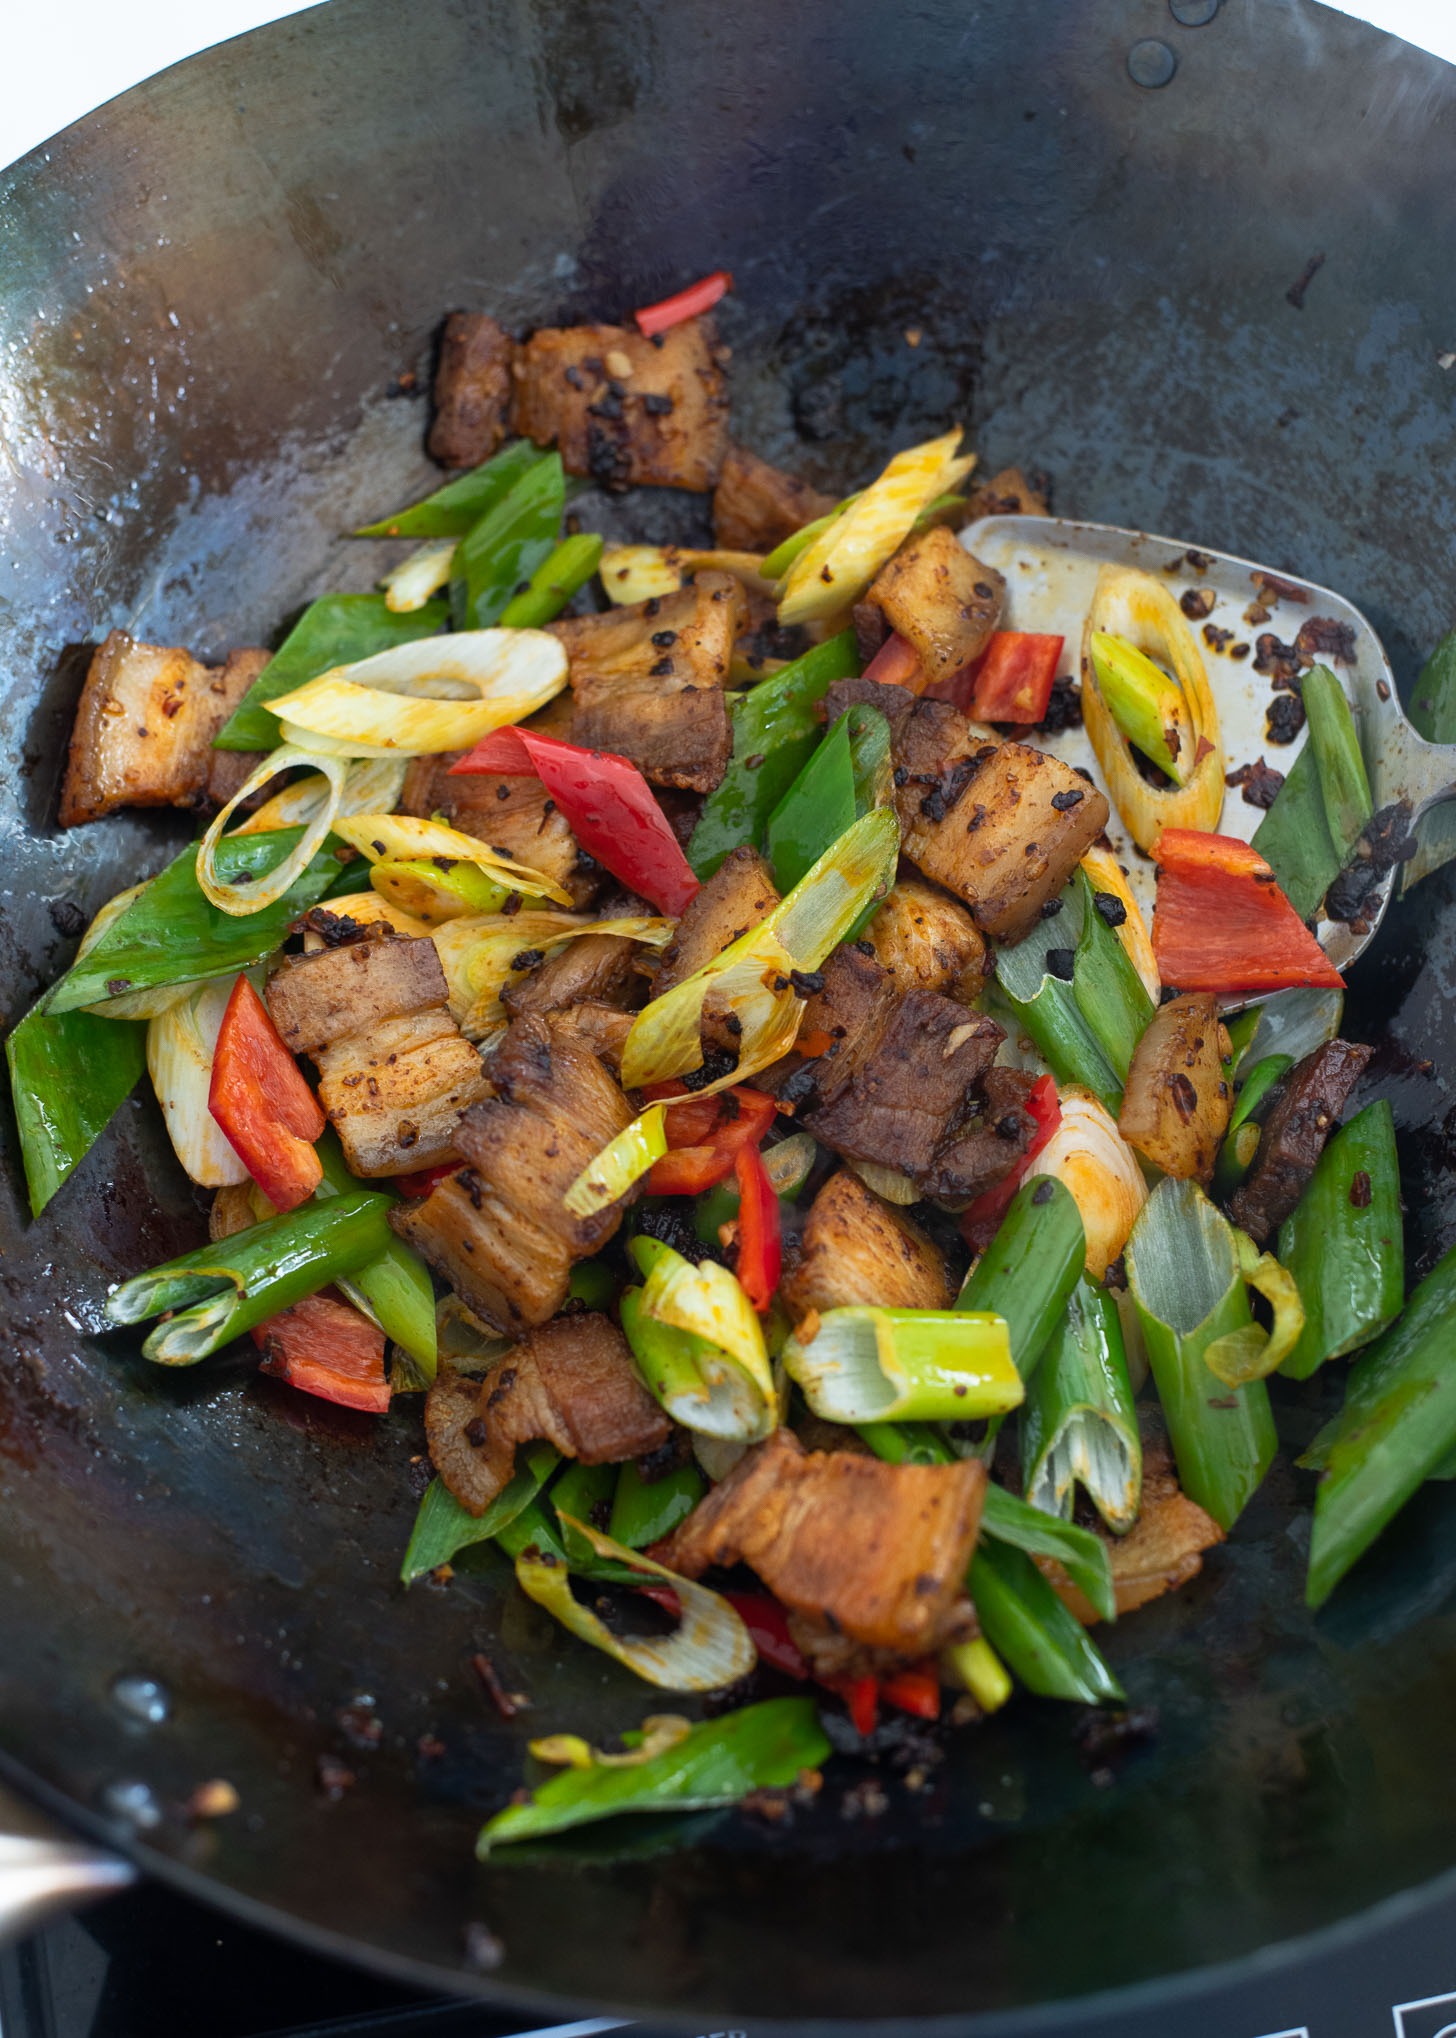 Asian leek and red chili are added to twice cooked pork to finish cooking.